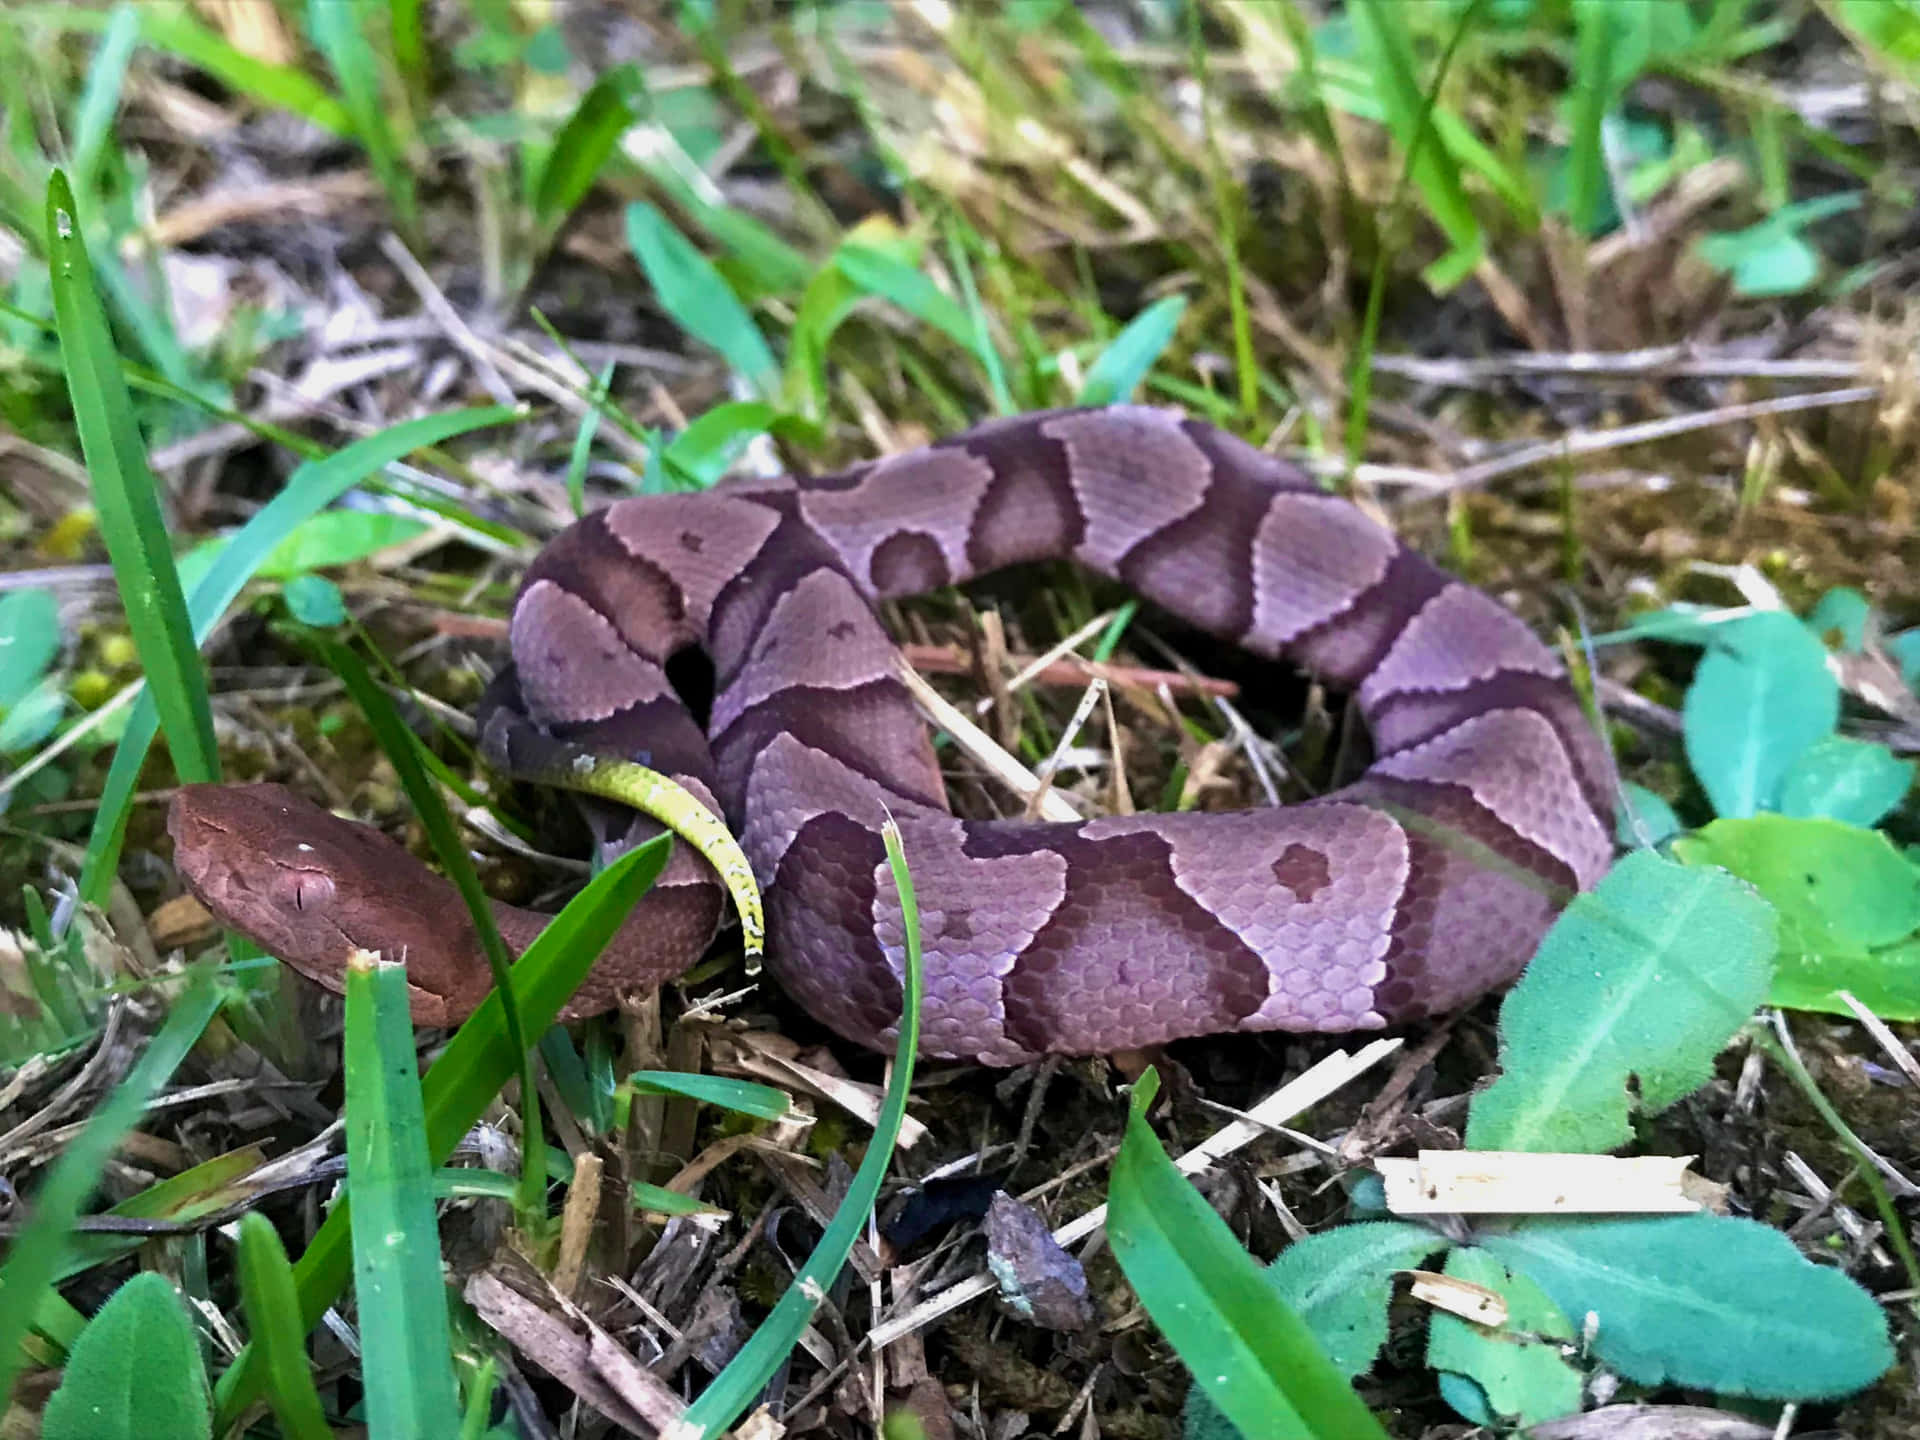 Copperhead Snake waiting quietly in the grass